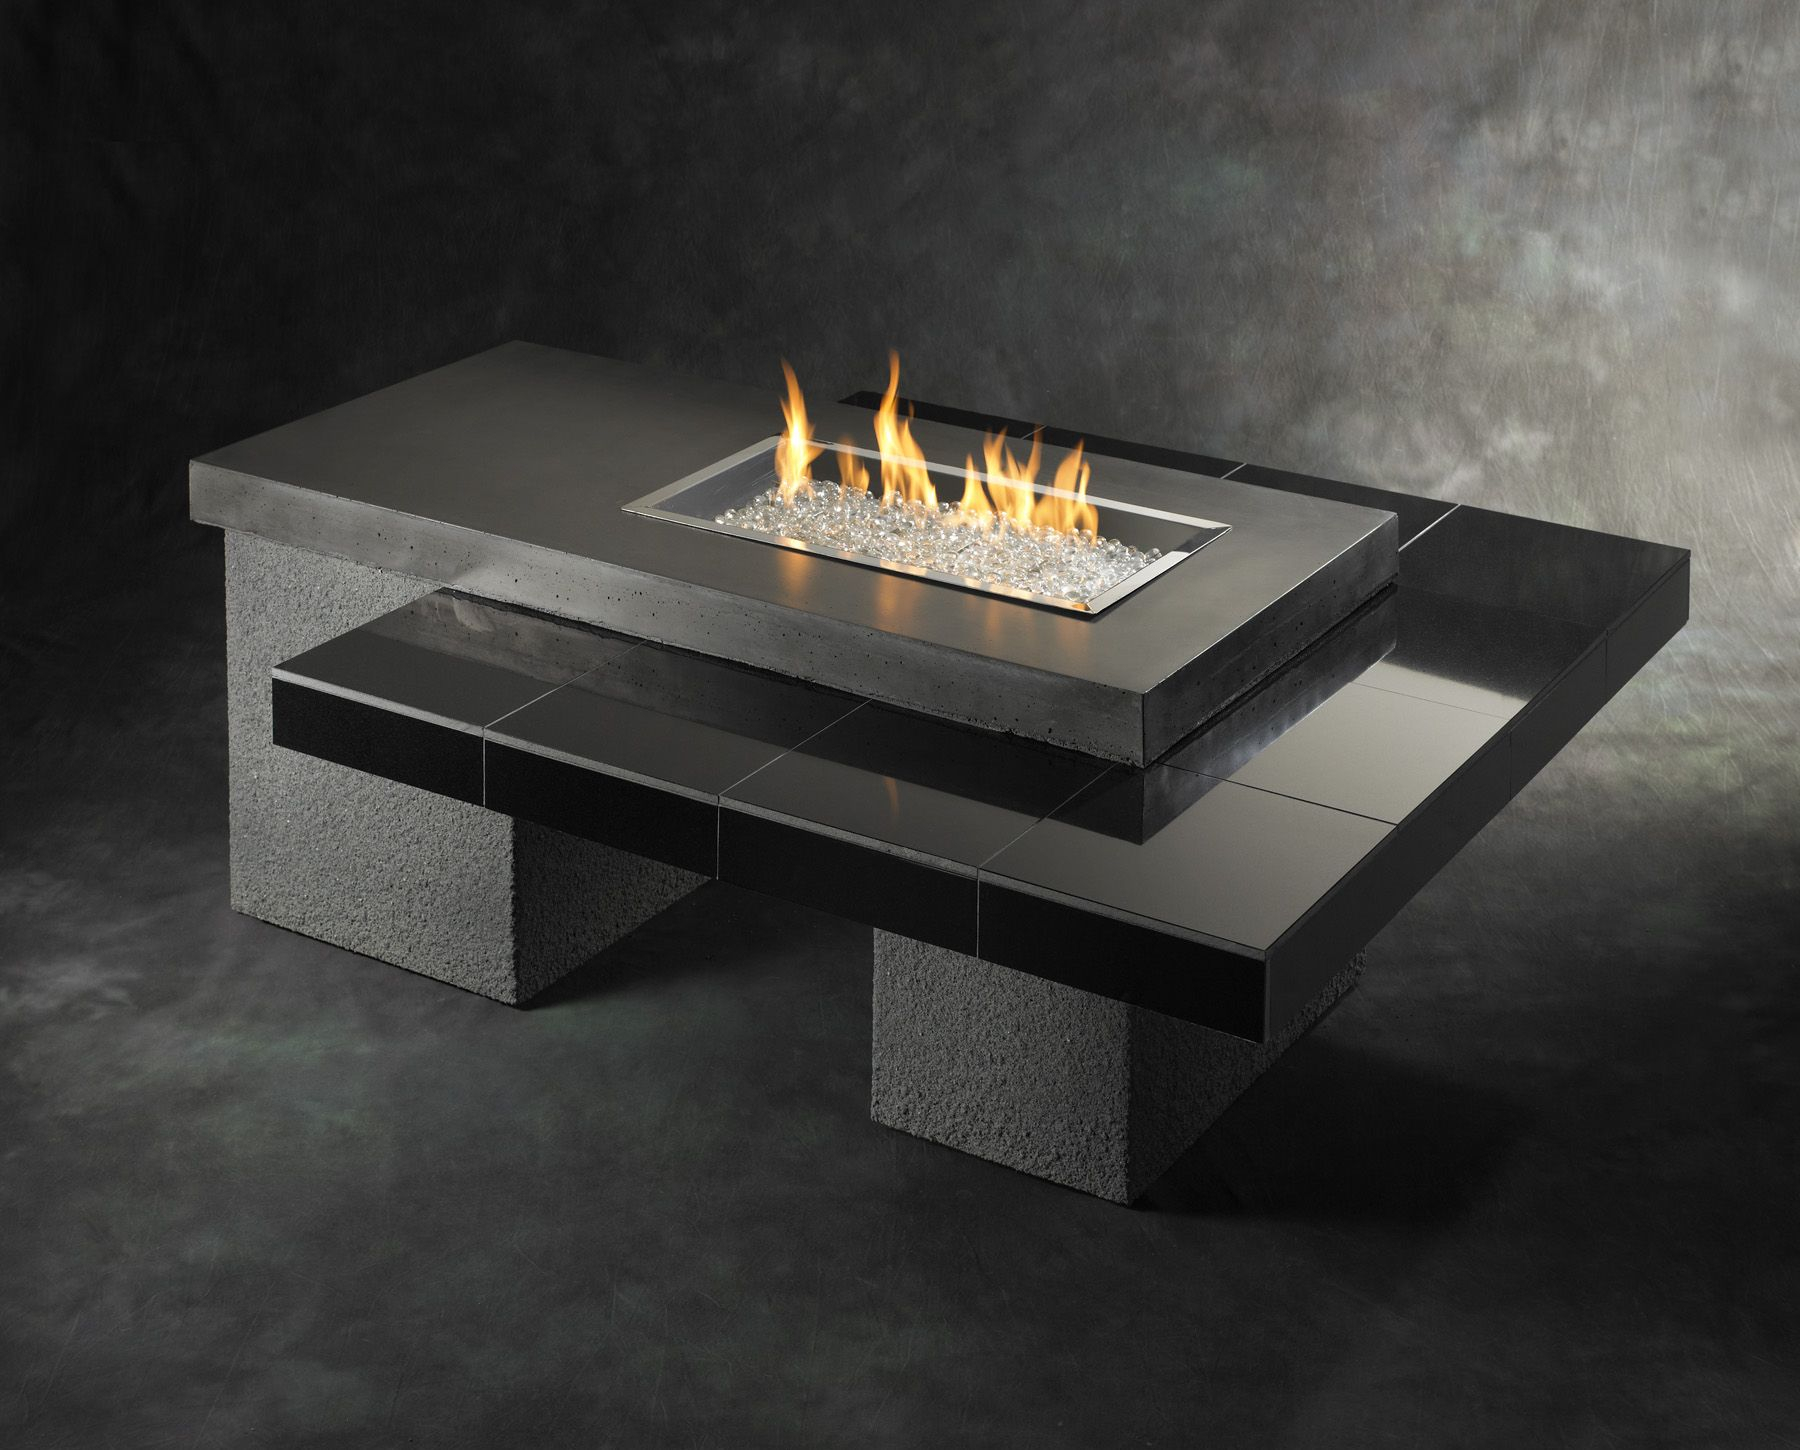 Gray Modern Square Chair The Portable Square Modern Fire Pit Lavel within dimensions 1800 X 1450